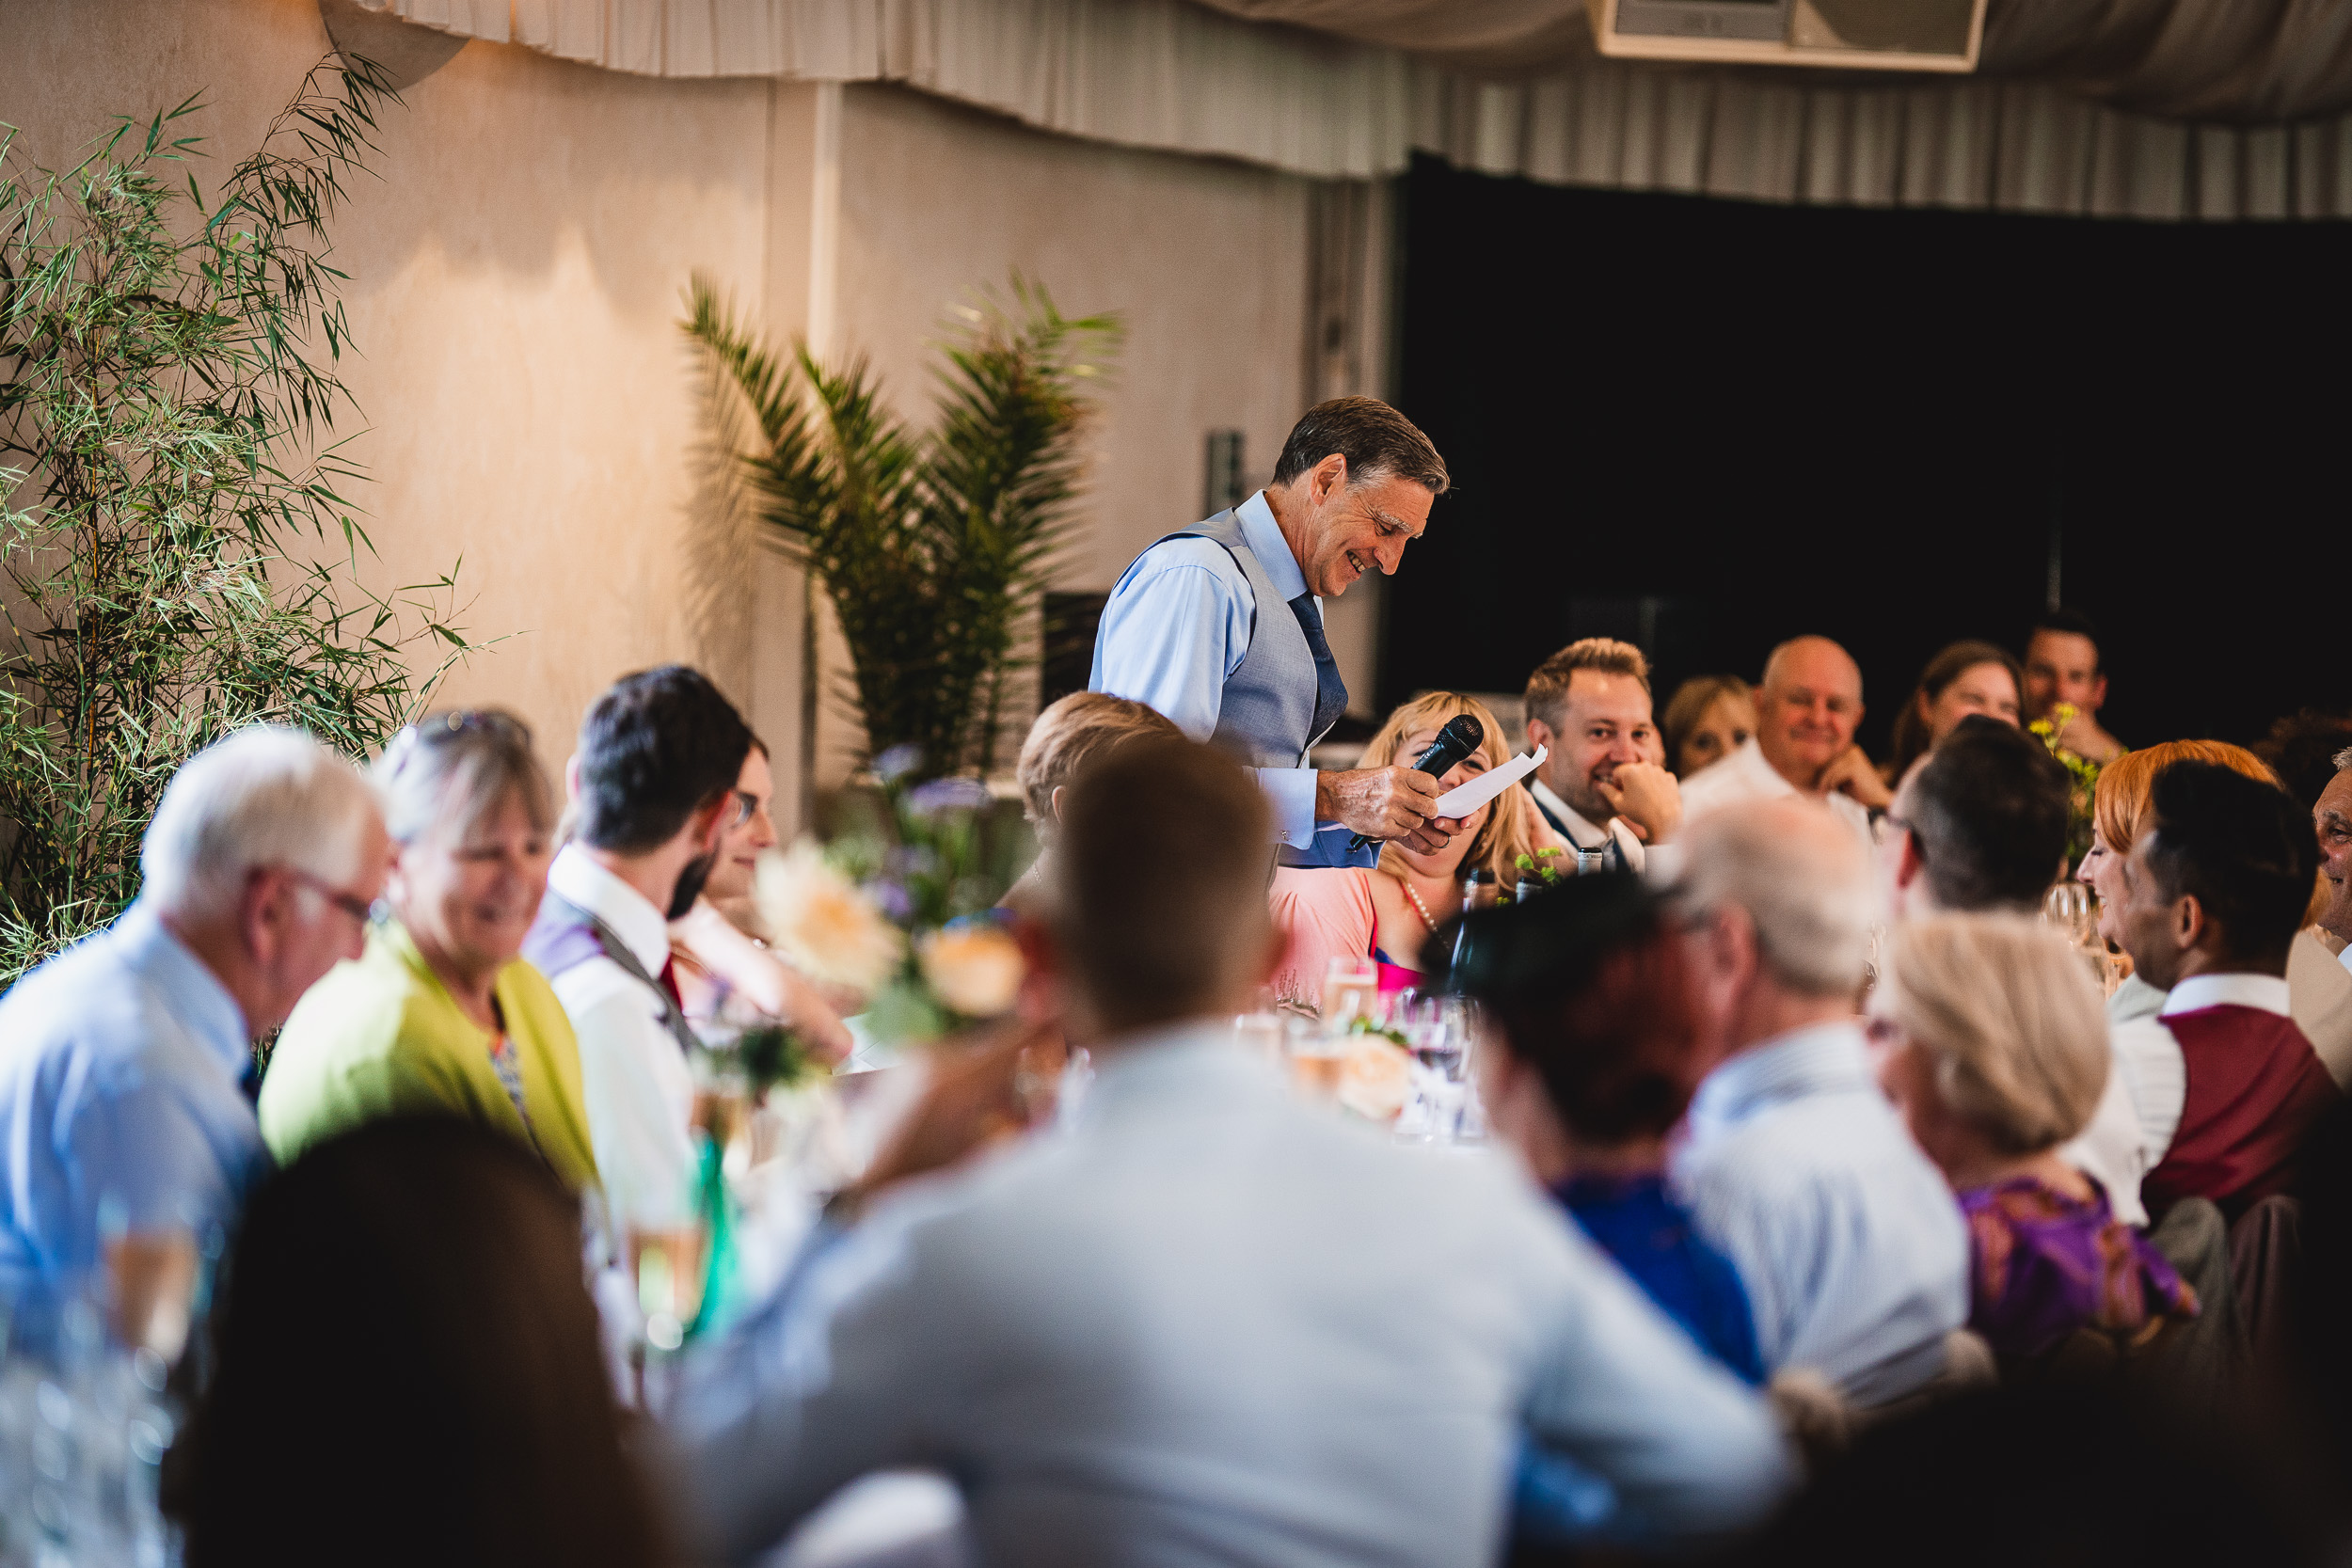 A man giving a speech to a group of people at a Surrey wedding.